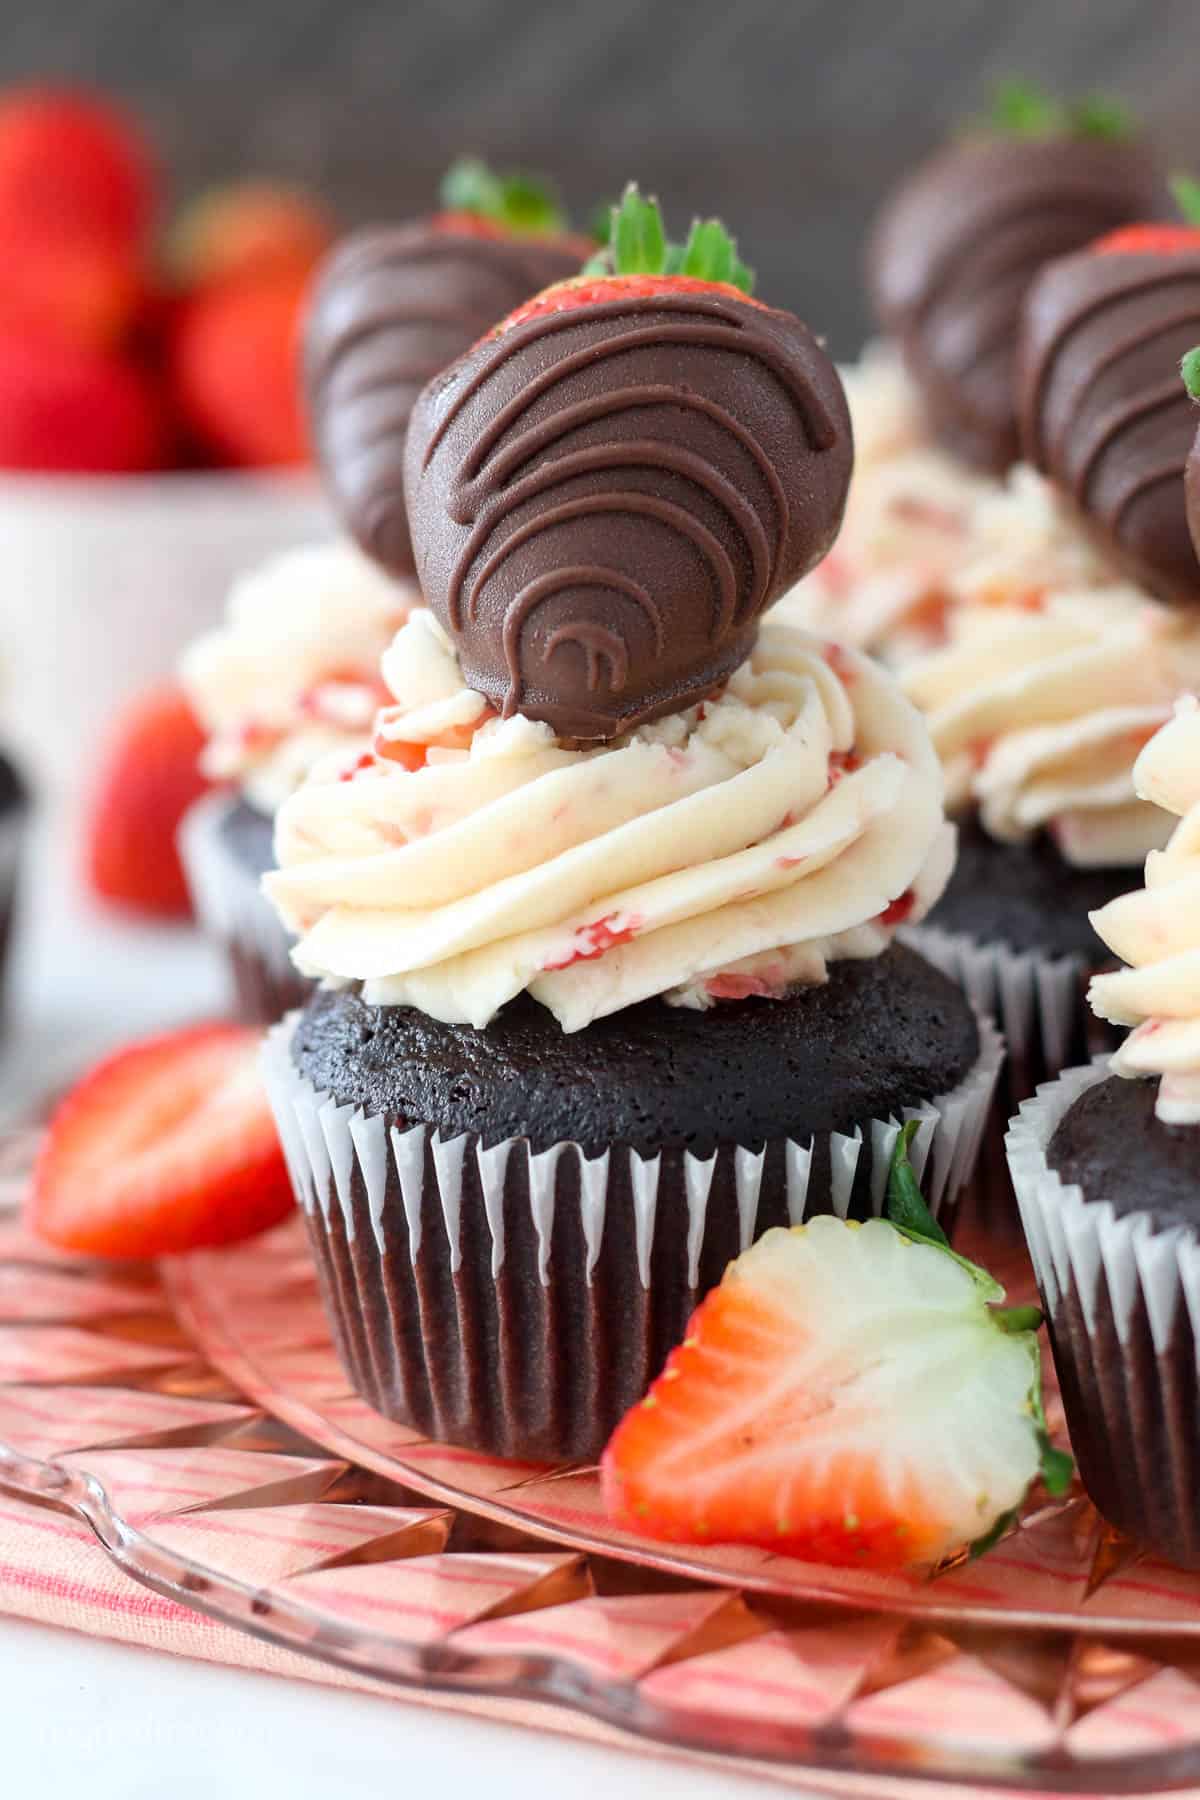 A close up shot of a gorgeous chocolate cupcake with a pretty pink strawberry frosting and a chocolate covered strawberry on top. It's sitting on a pink glass cake plate with a pink striped towel underneath.